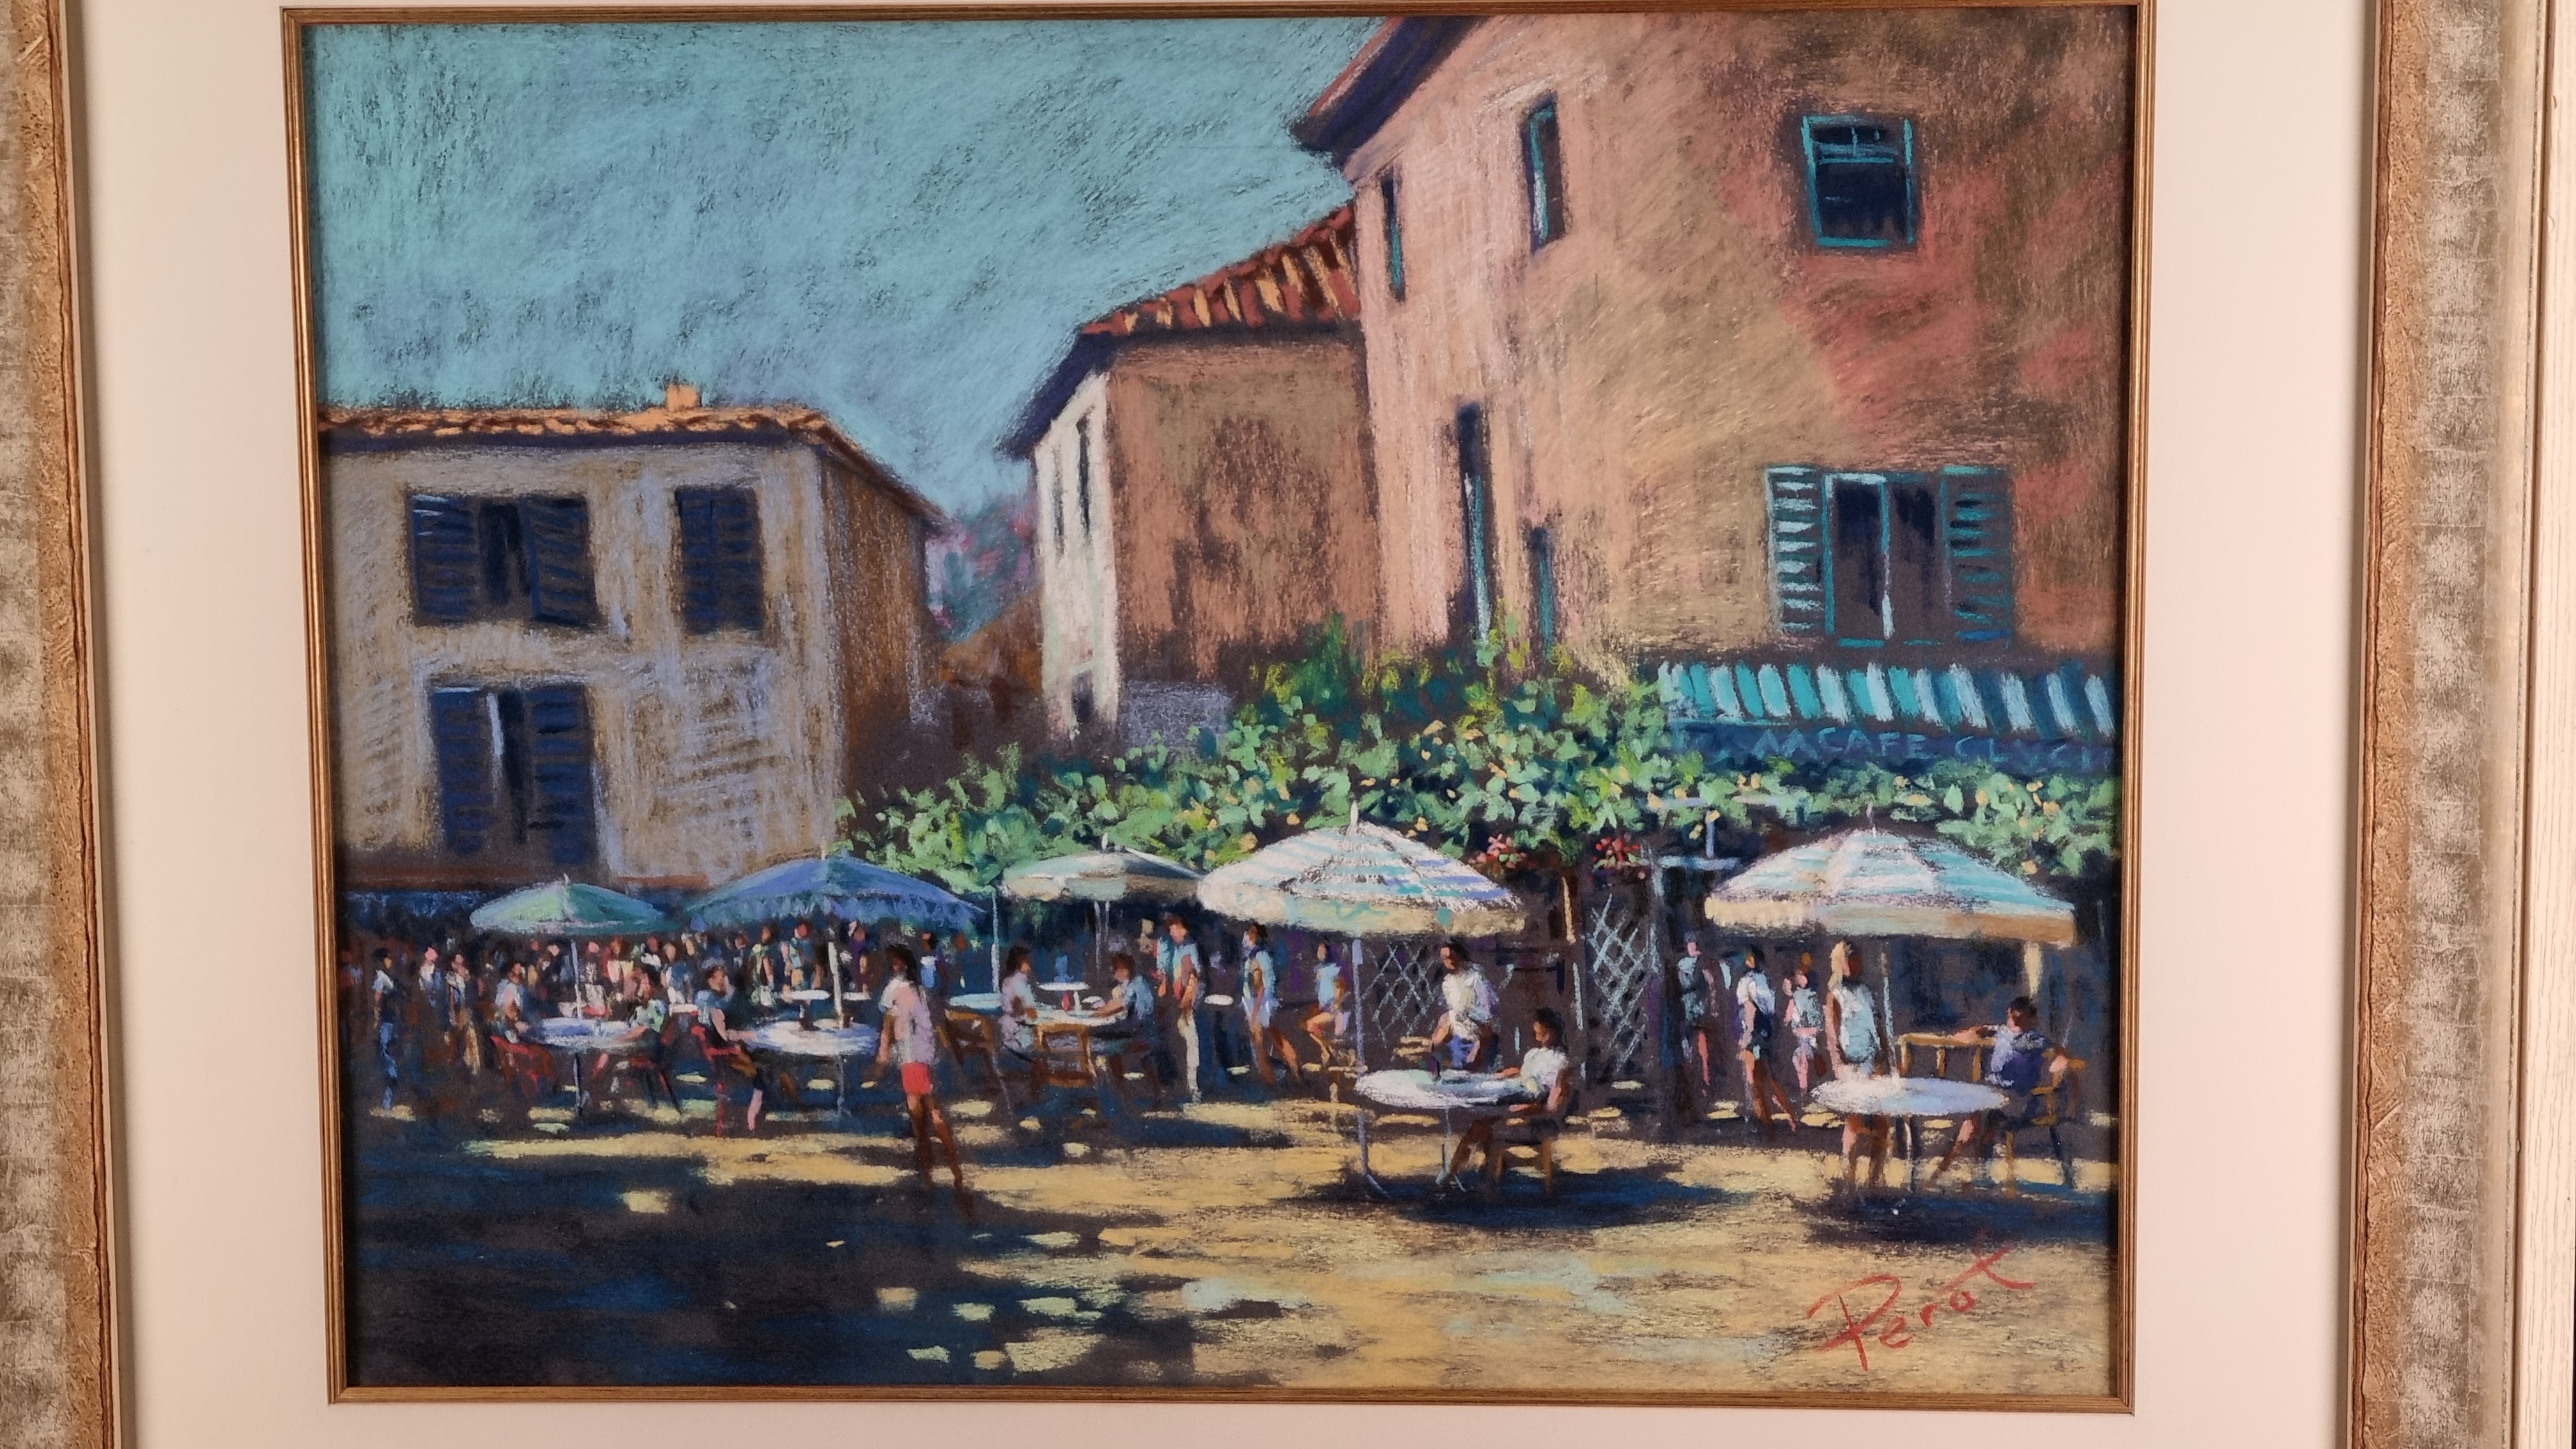 Original Framed Pastel Painting by Perot - Image 3 of 7